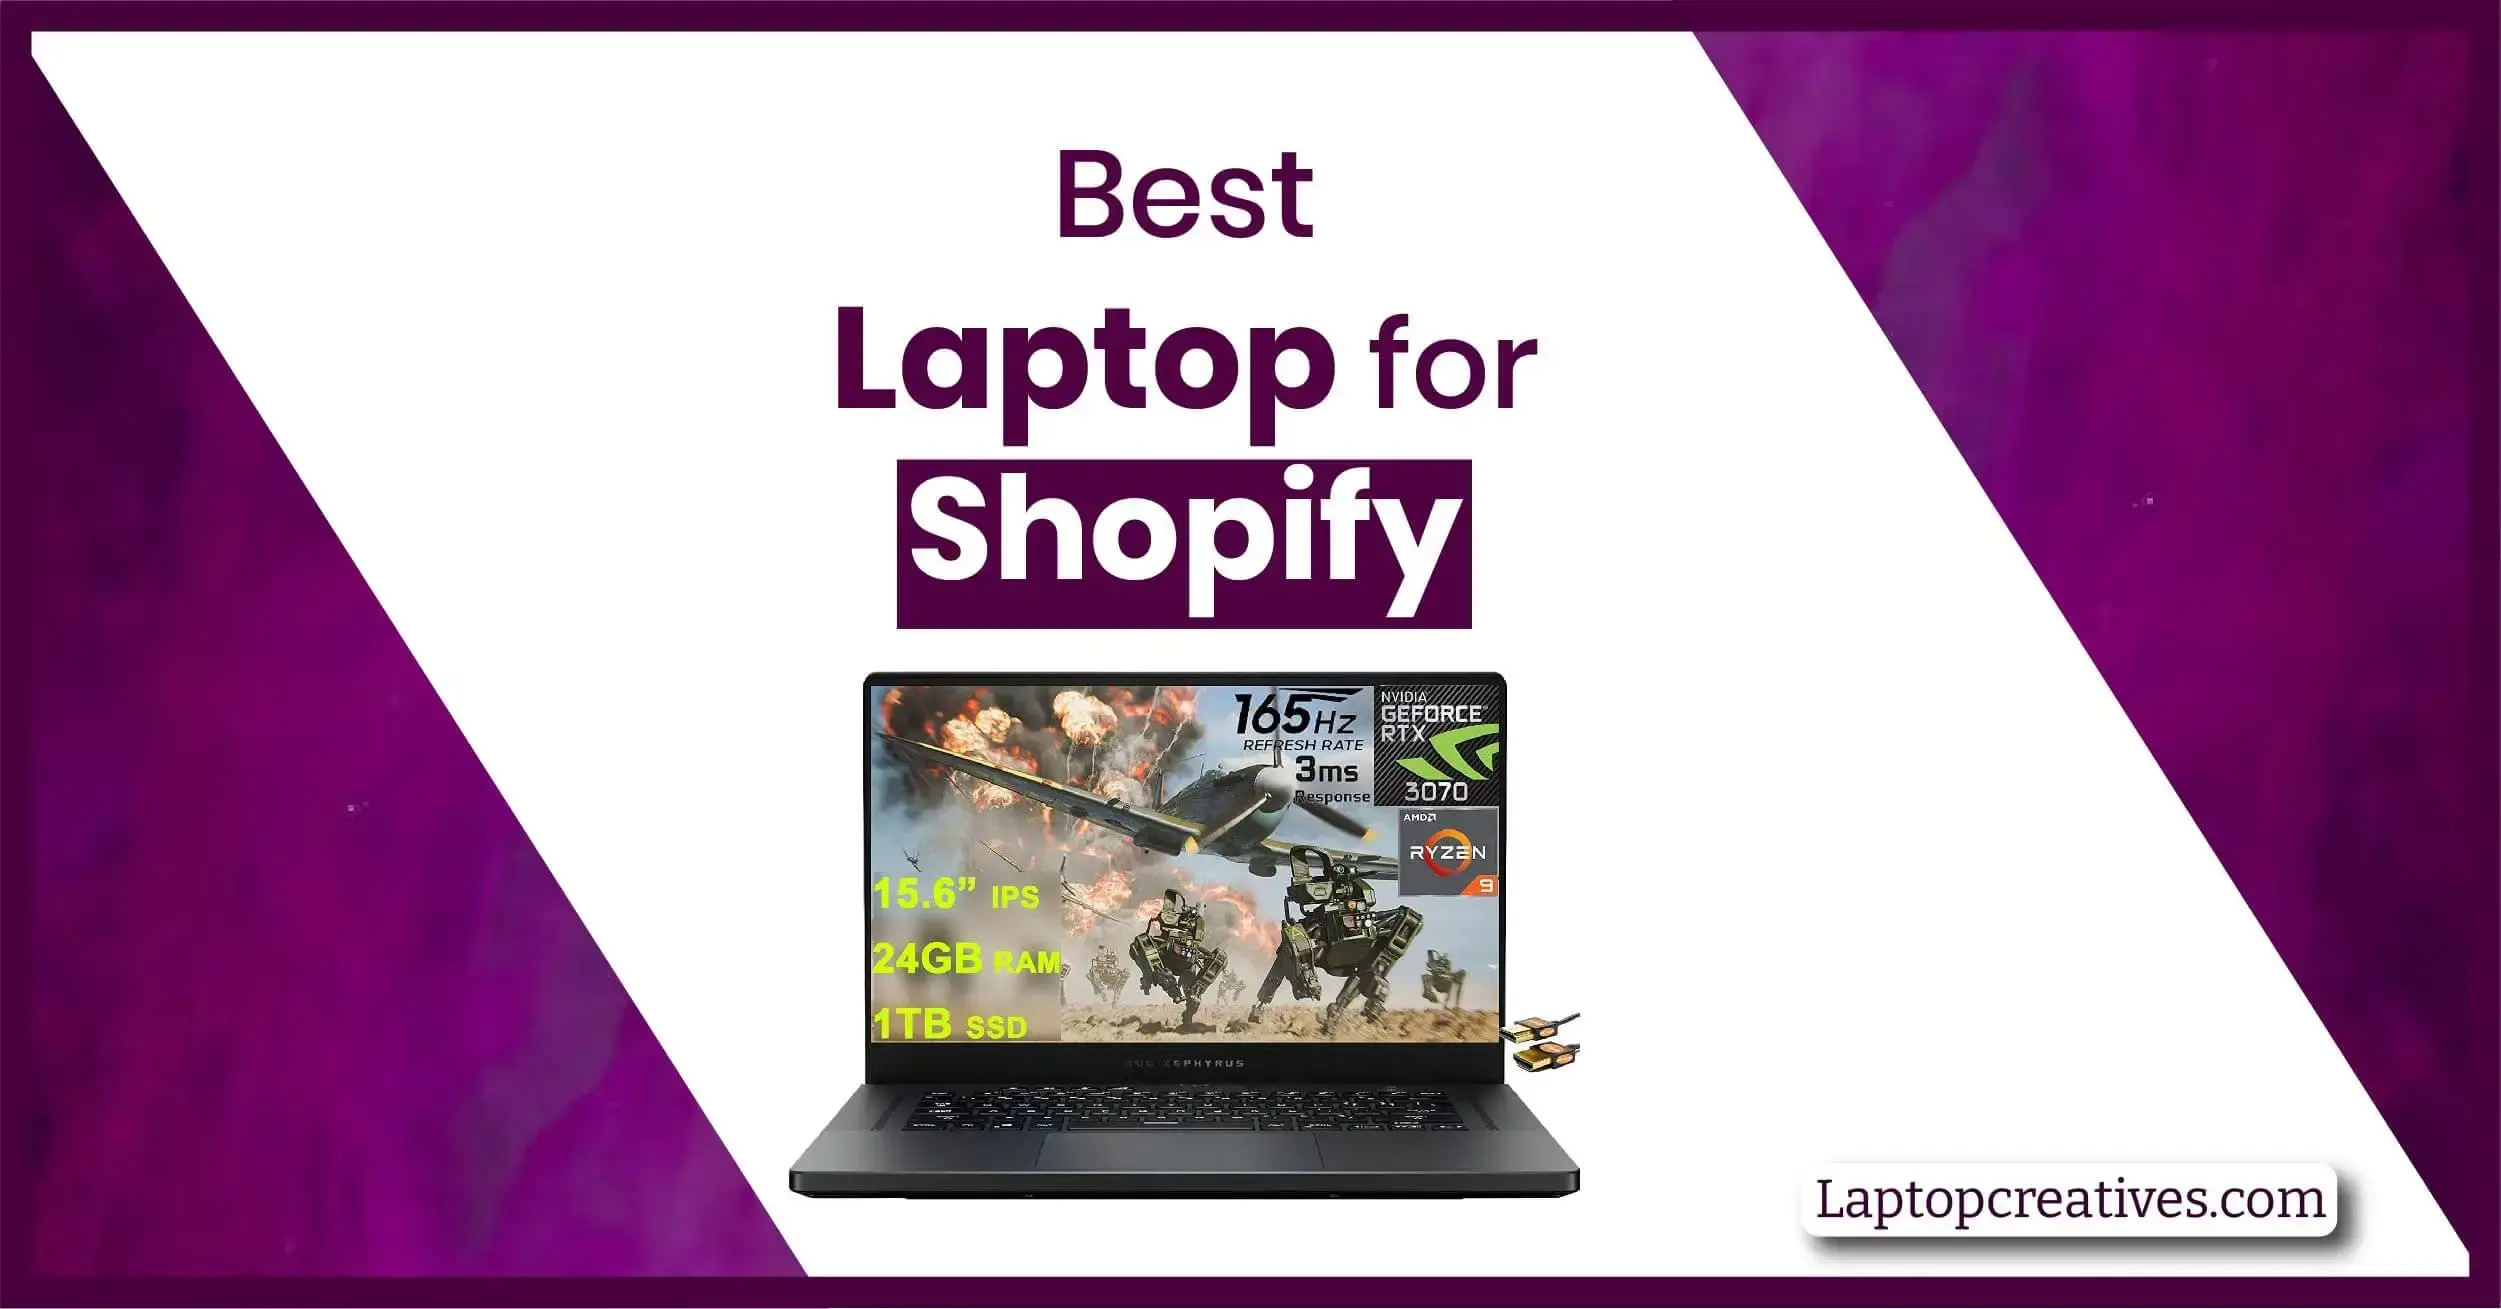 Best Laptop for Shopify